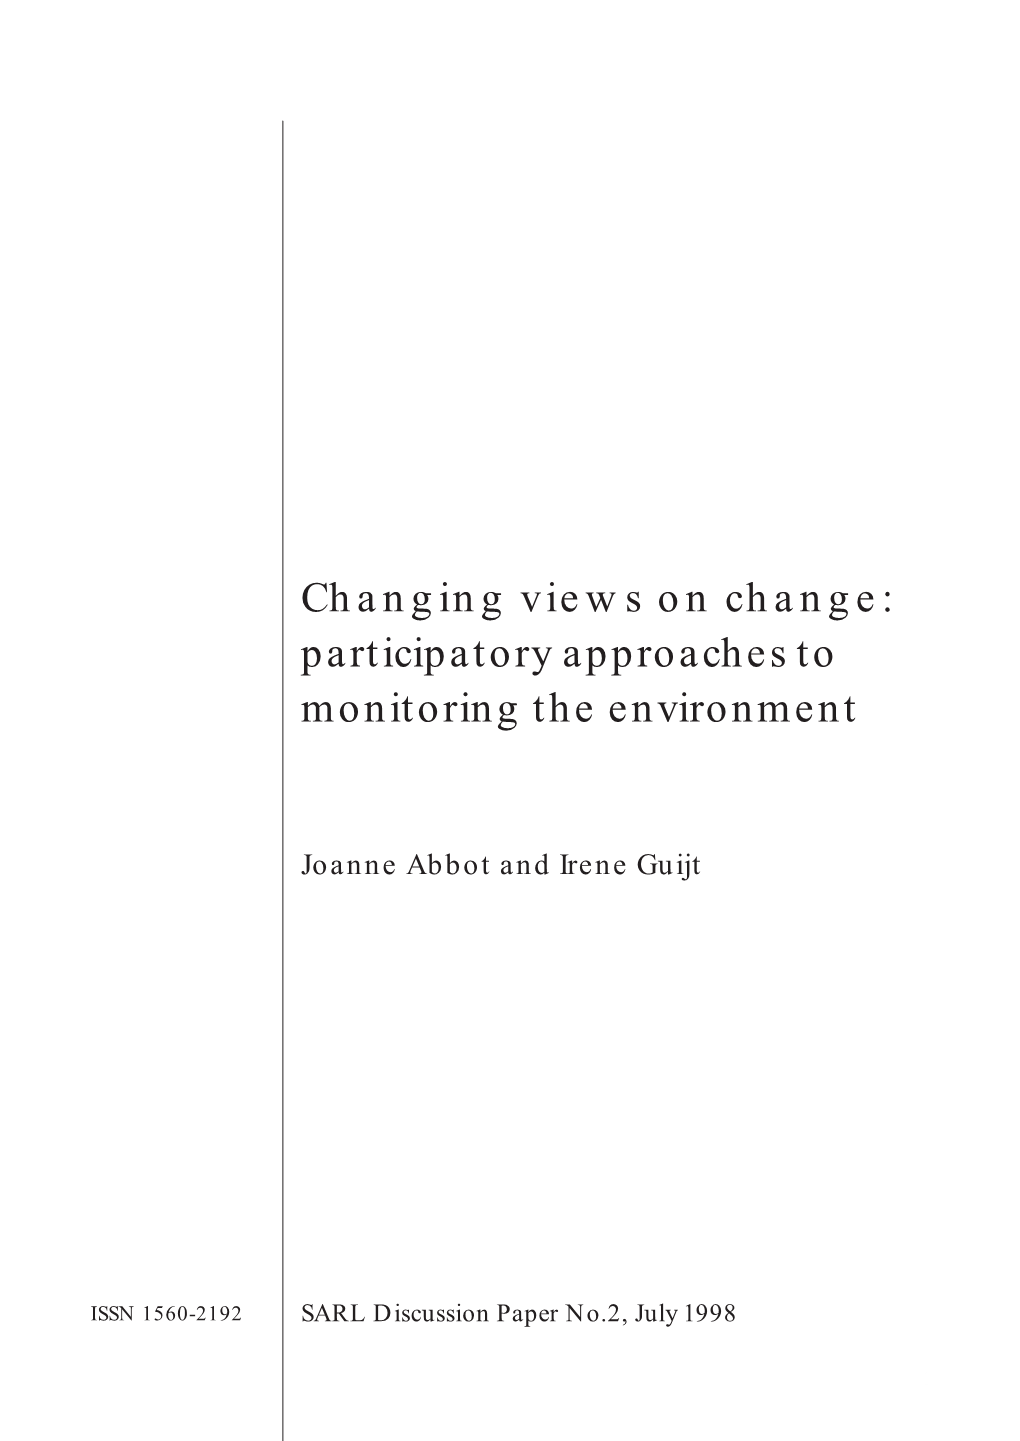 Changing Views on Change: Participatory Approaches to Monitoring the Environment